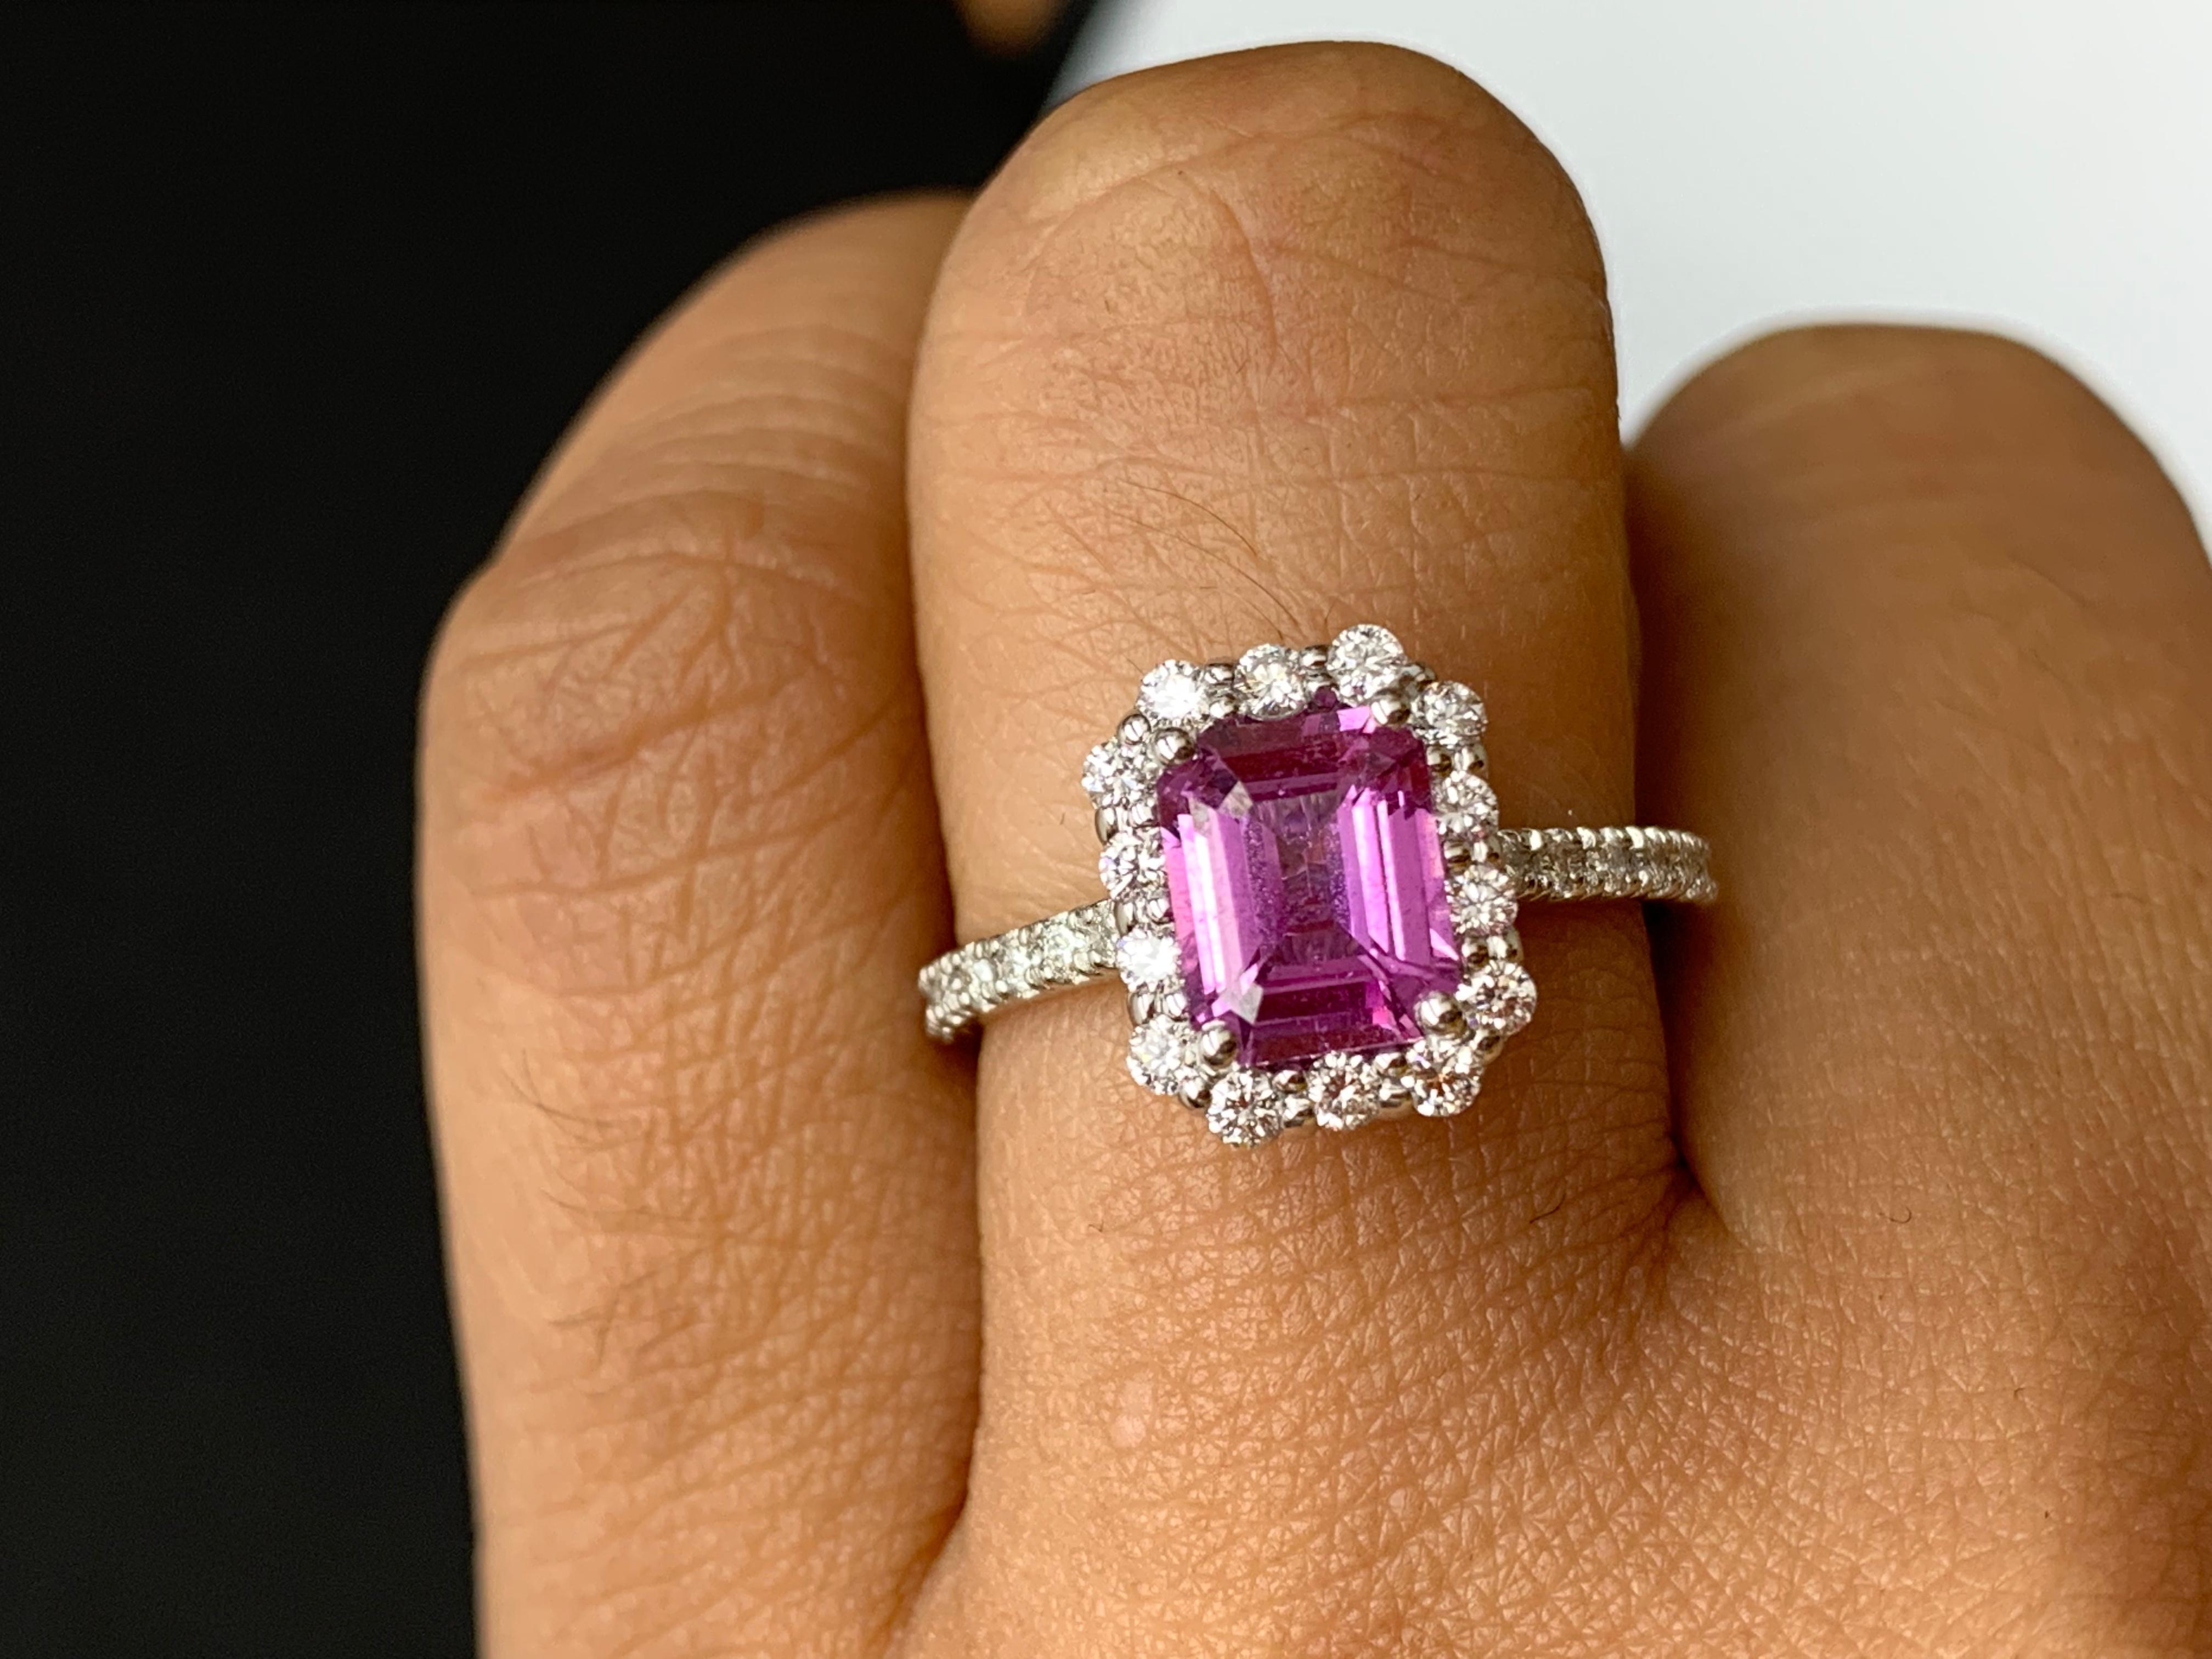 1.59 Carat Emerald Cut Pink Sapphire Diamond Engagement Ring in 14K White Gold For Sale 3